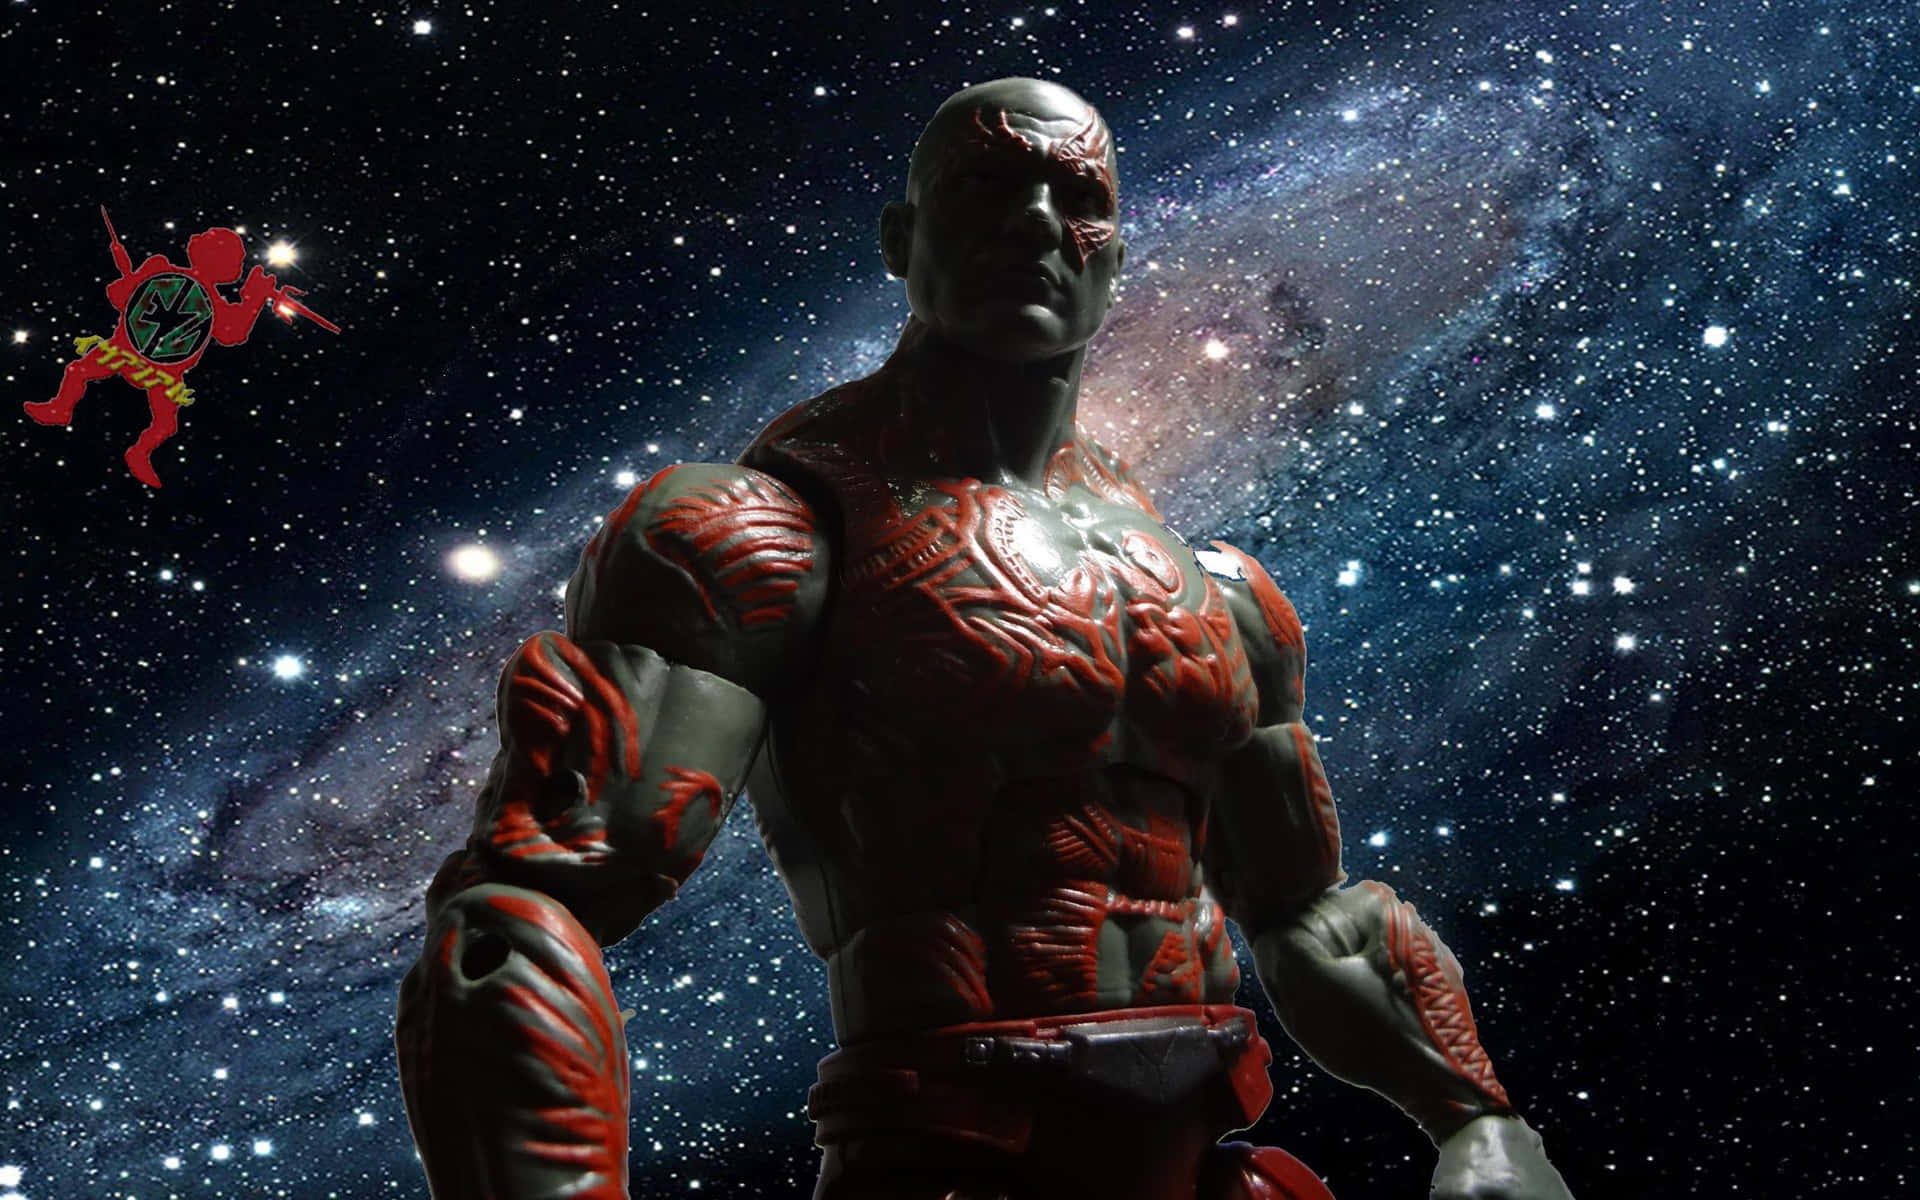 Dave Bautista as Drax the Destroyer in Marvel's Guardians of the Galaxy Wallpaper